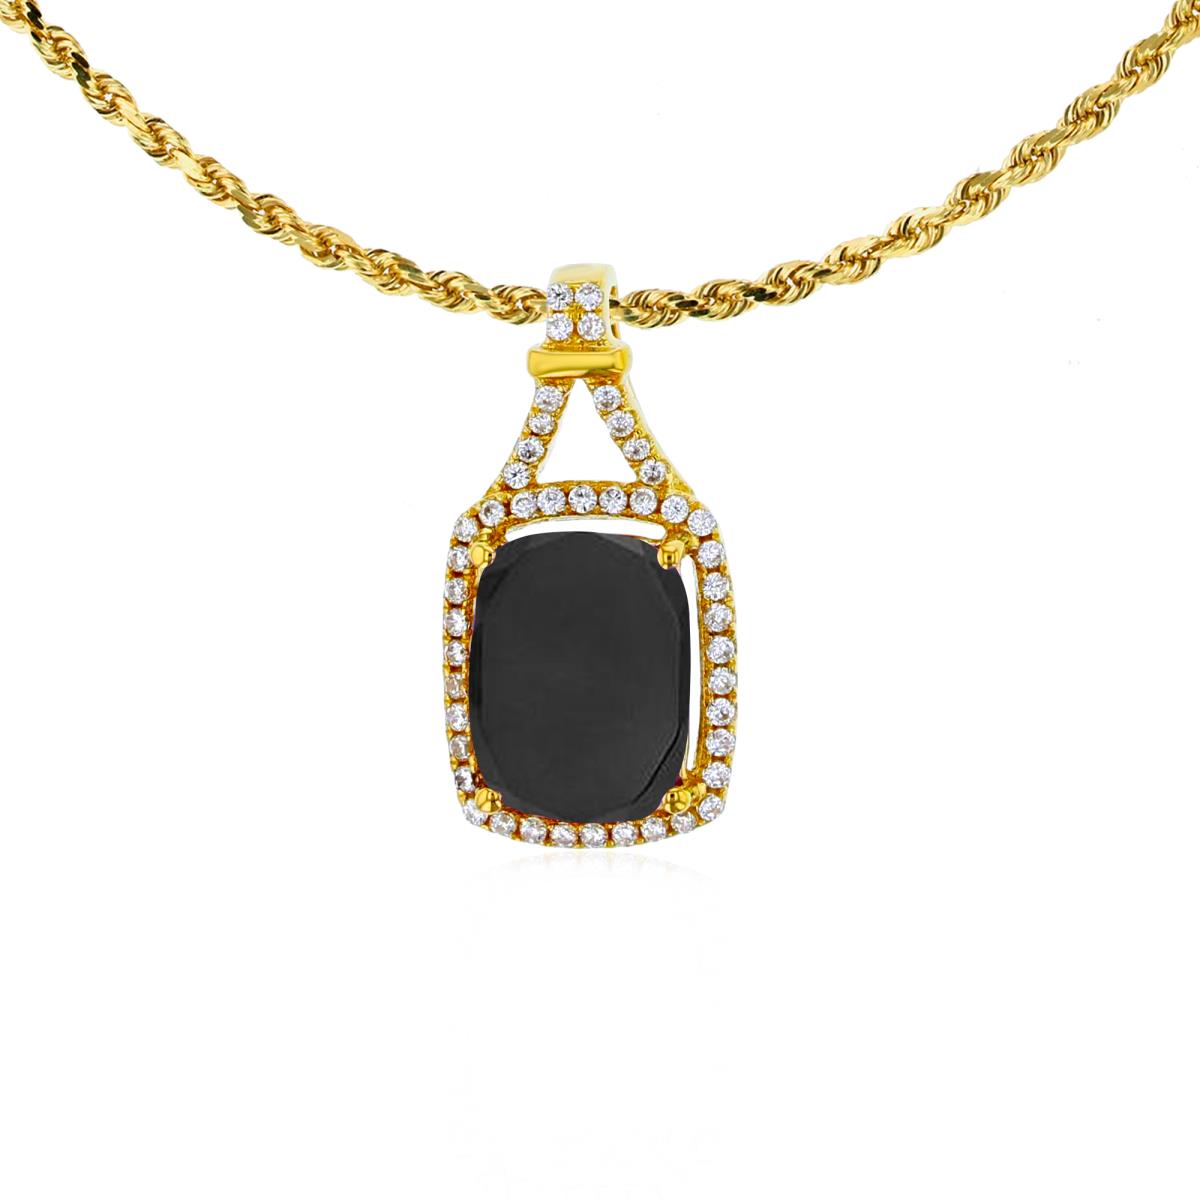 10K Yellow Gold 8x6mm Cushion Onyx & 0.13 CTTW Rd Diamonds Halo 18" Rope Chain Necklace